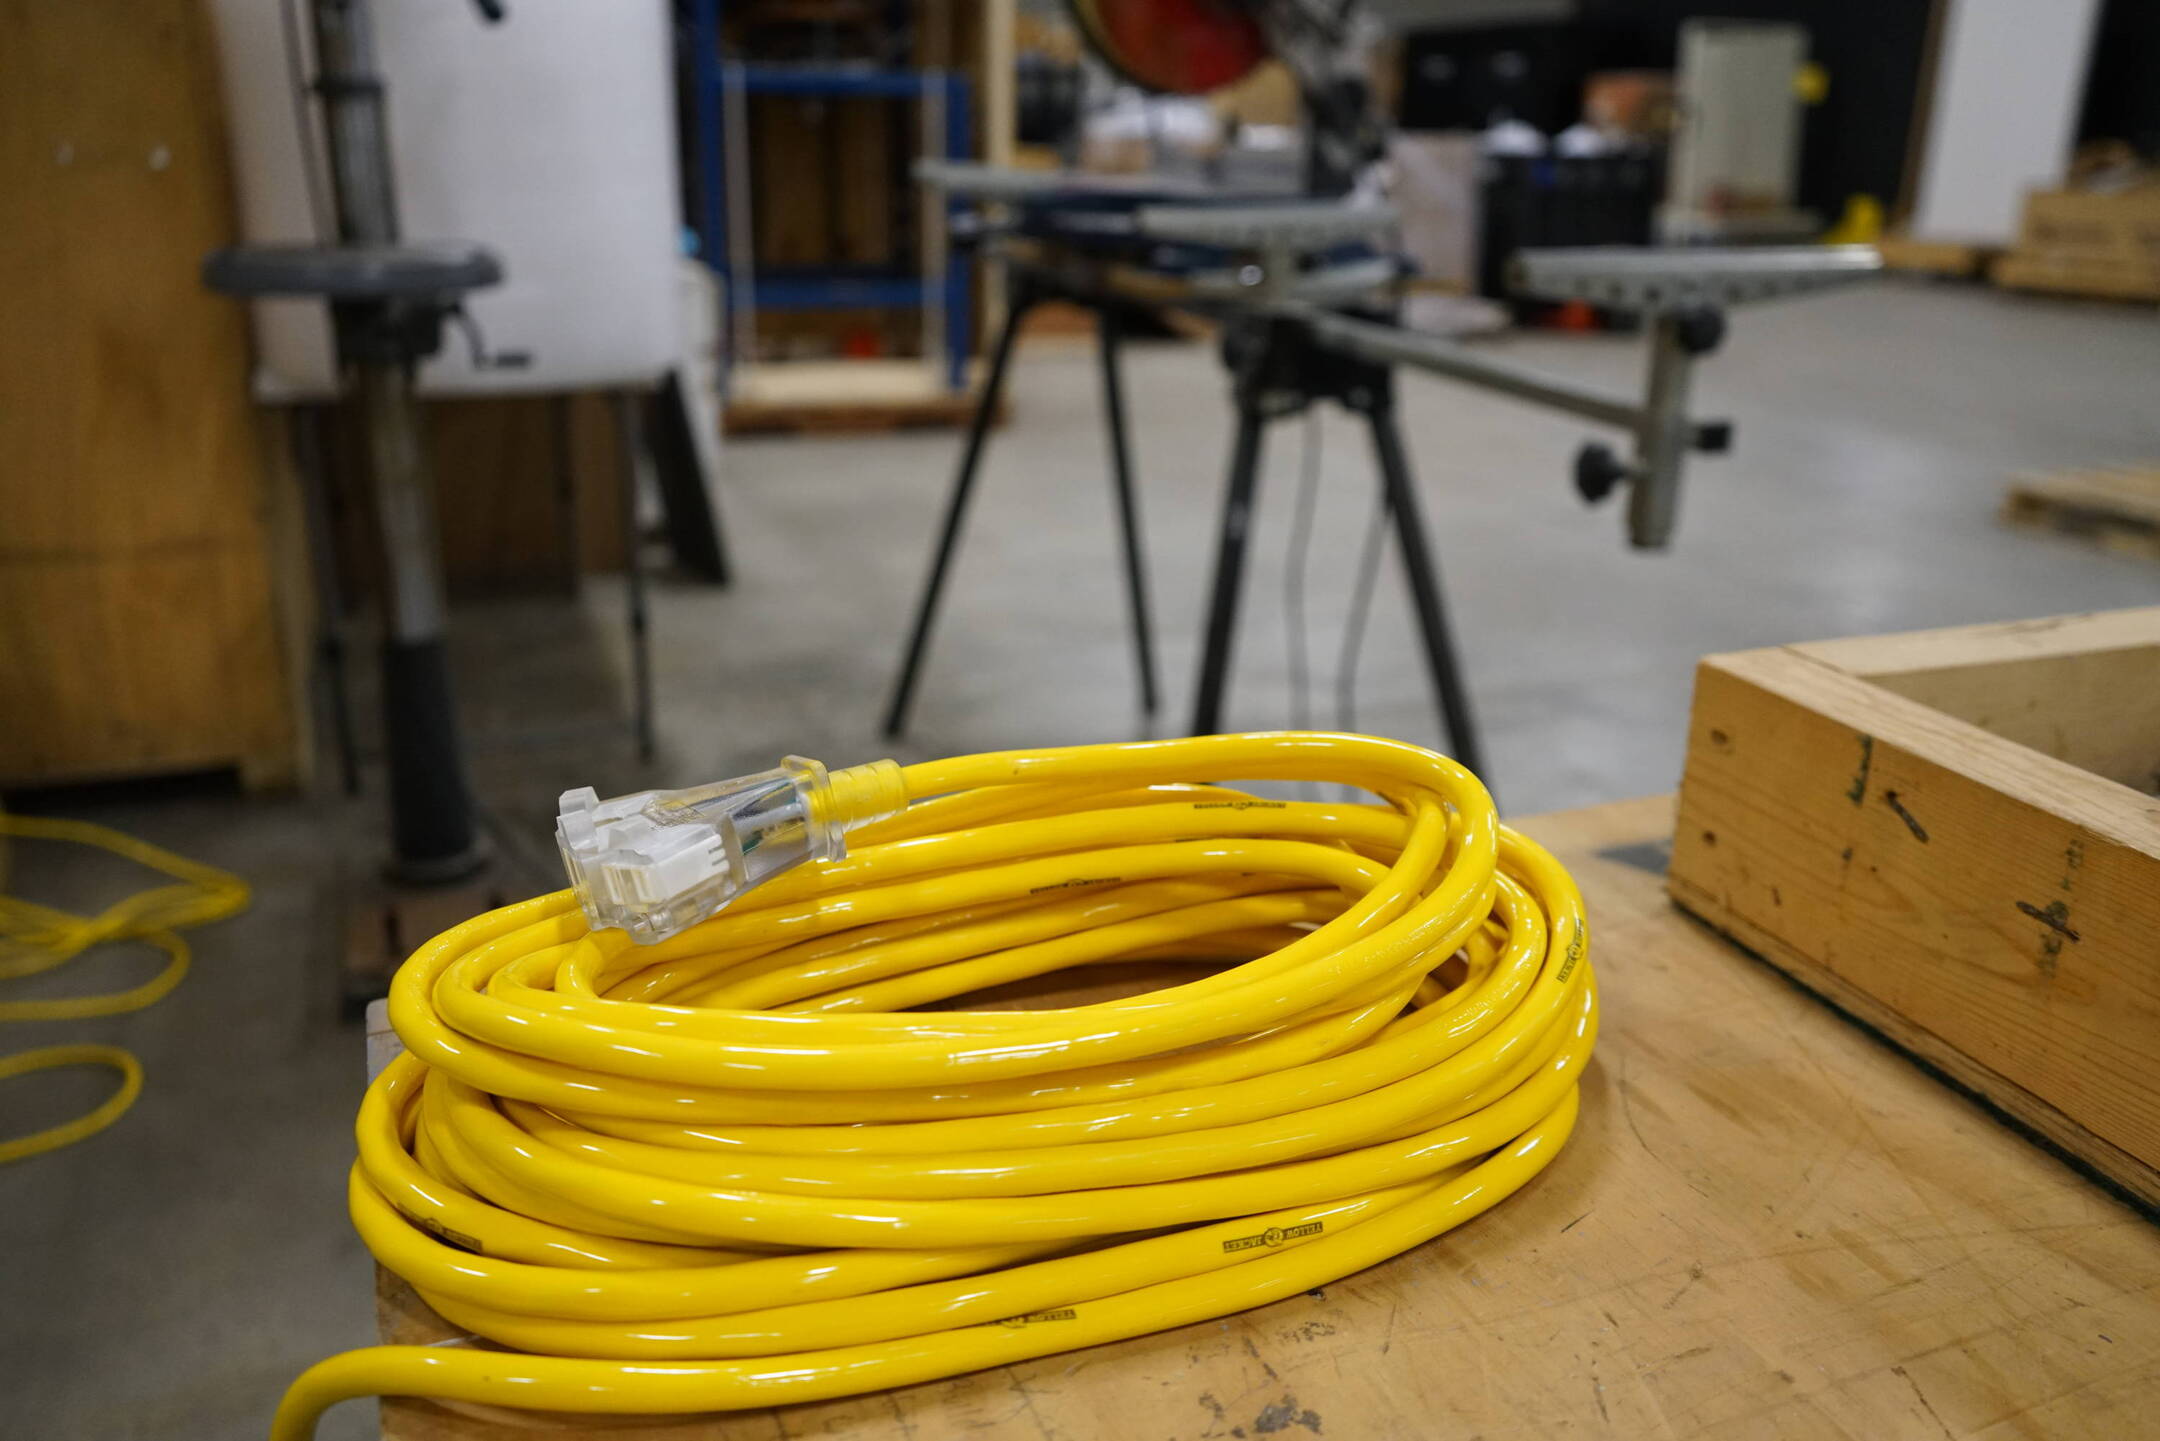 How Long Can An Extension Cord Be Used In A Facility